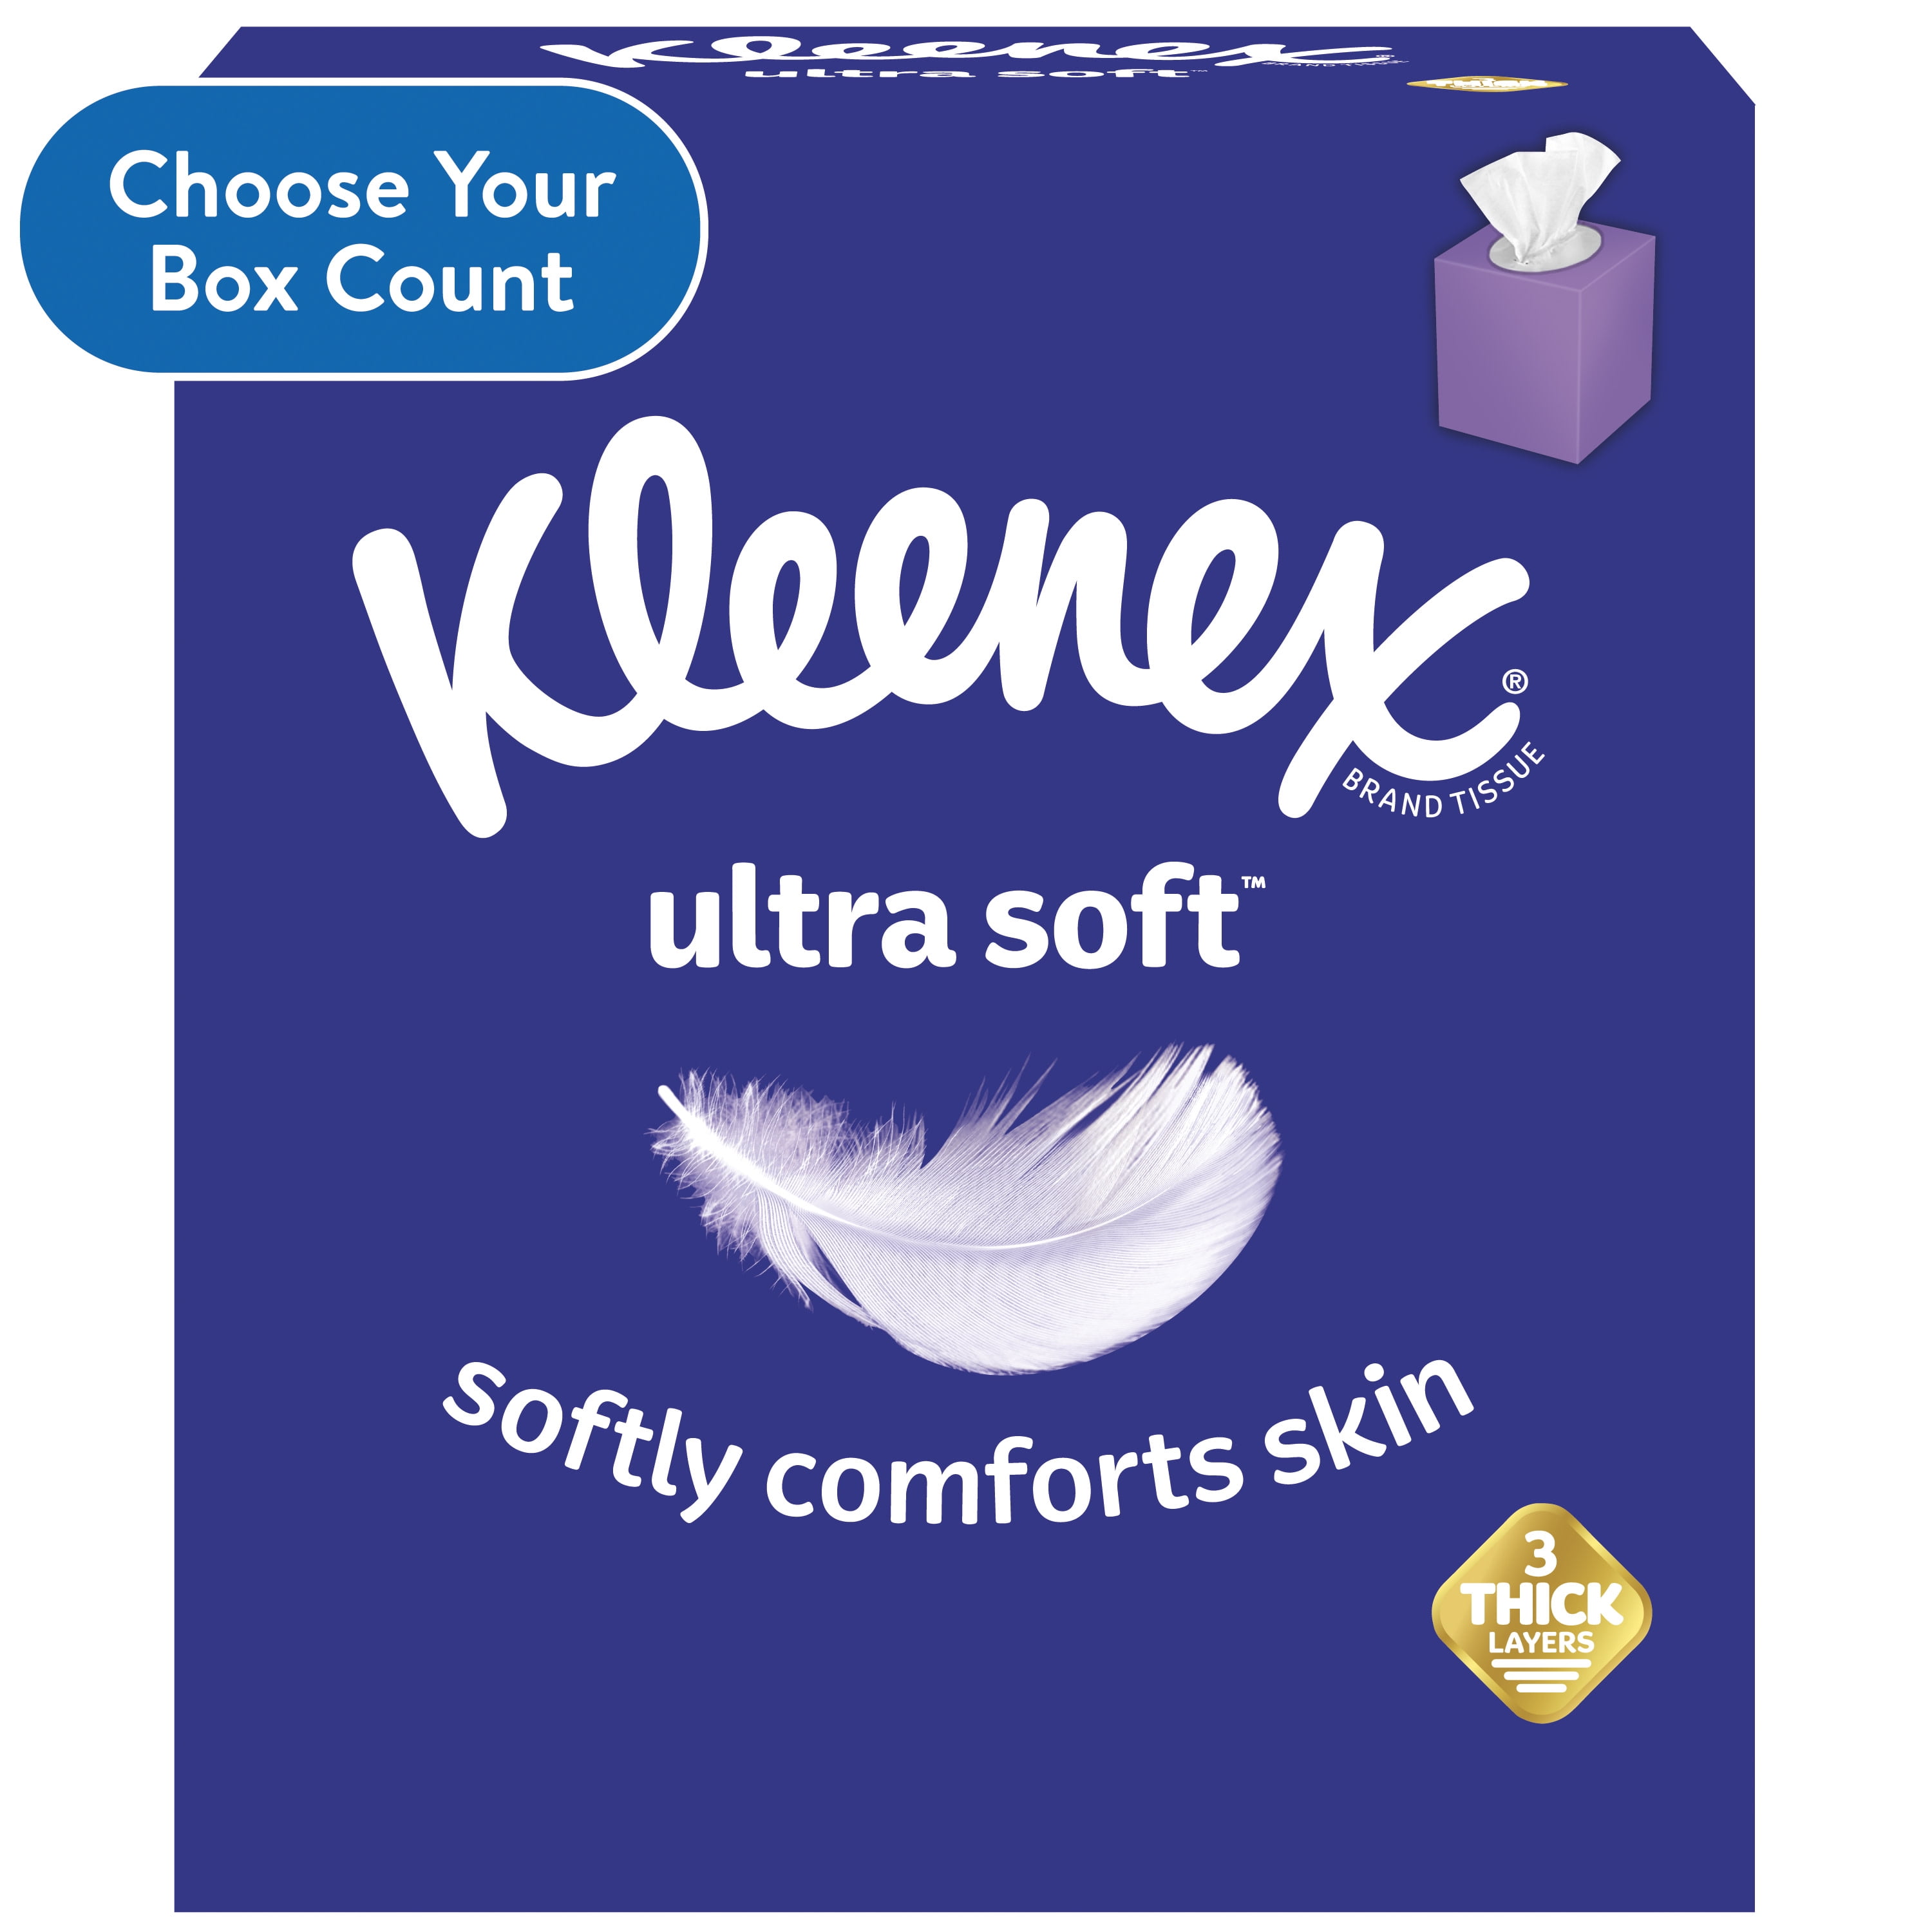 Kleenex Ultra Soft Facial Tissues, 2 Cube Boxes (120 Total Tissues)